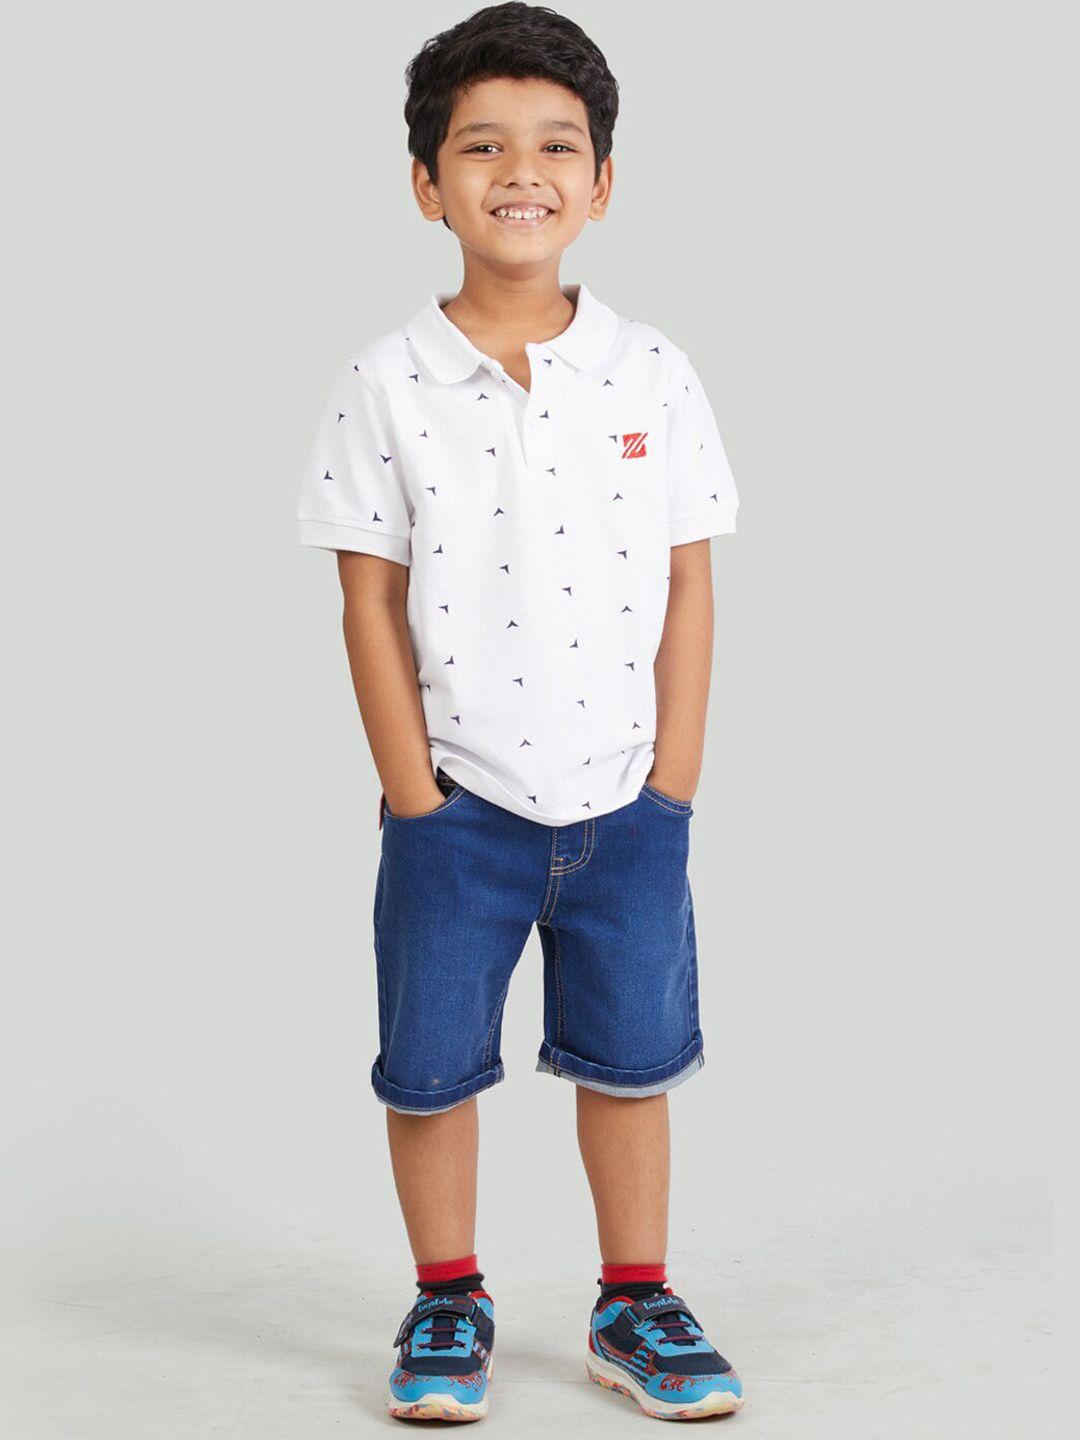 zalio boys white & blue checked t-shirt with trousers